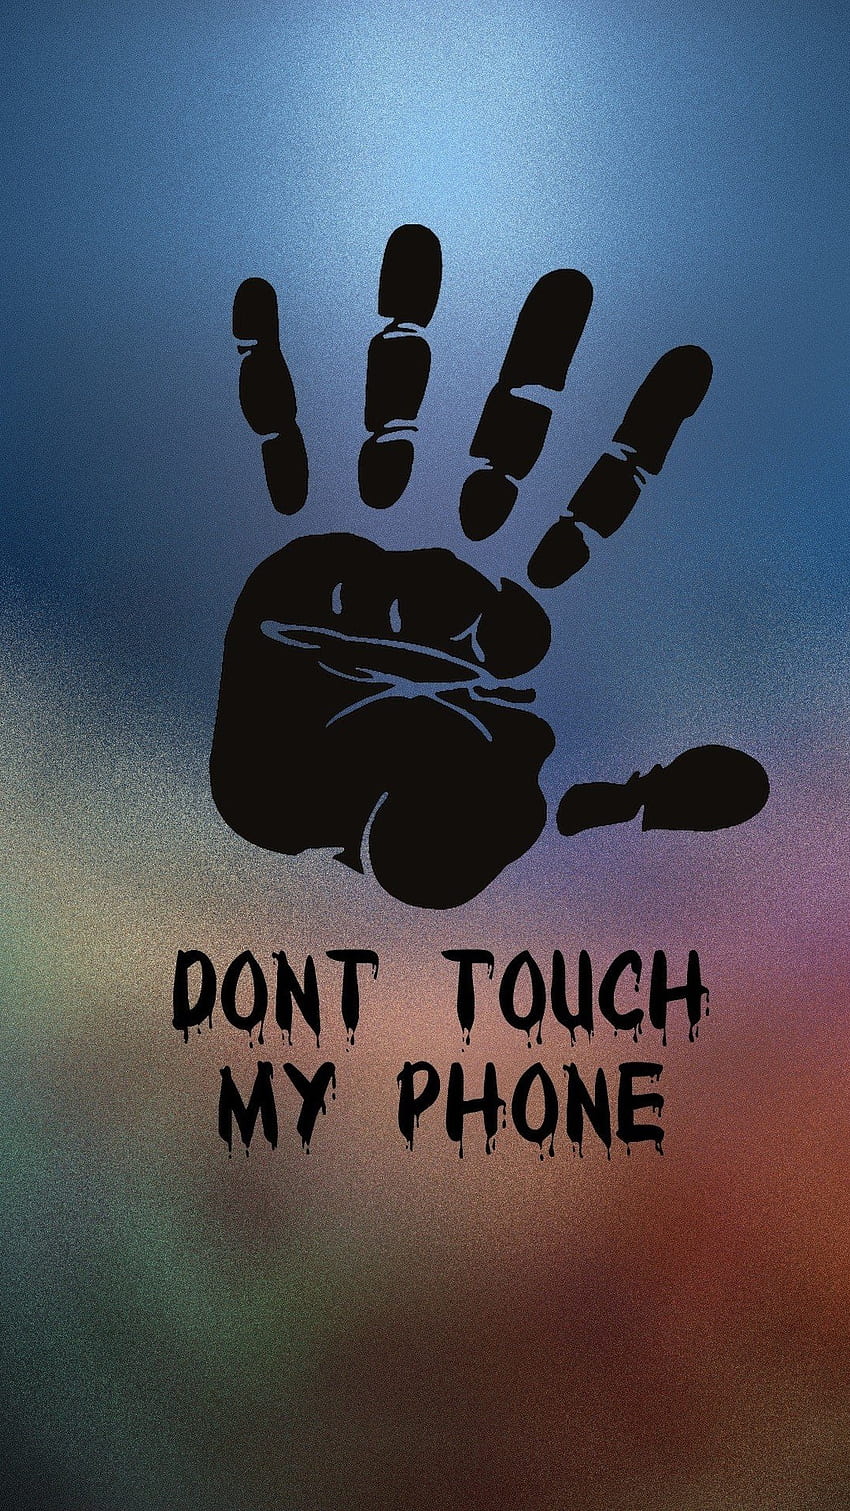 Don't Touch My Phone Live, Finger Print, Background, don't touch my Phone Live วอลล์เปเปอร์โทรศัพท์ HD